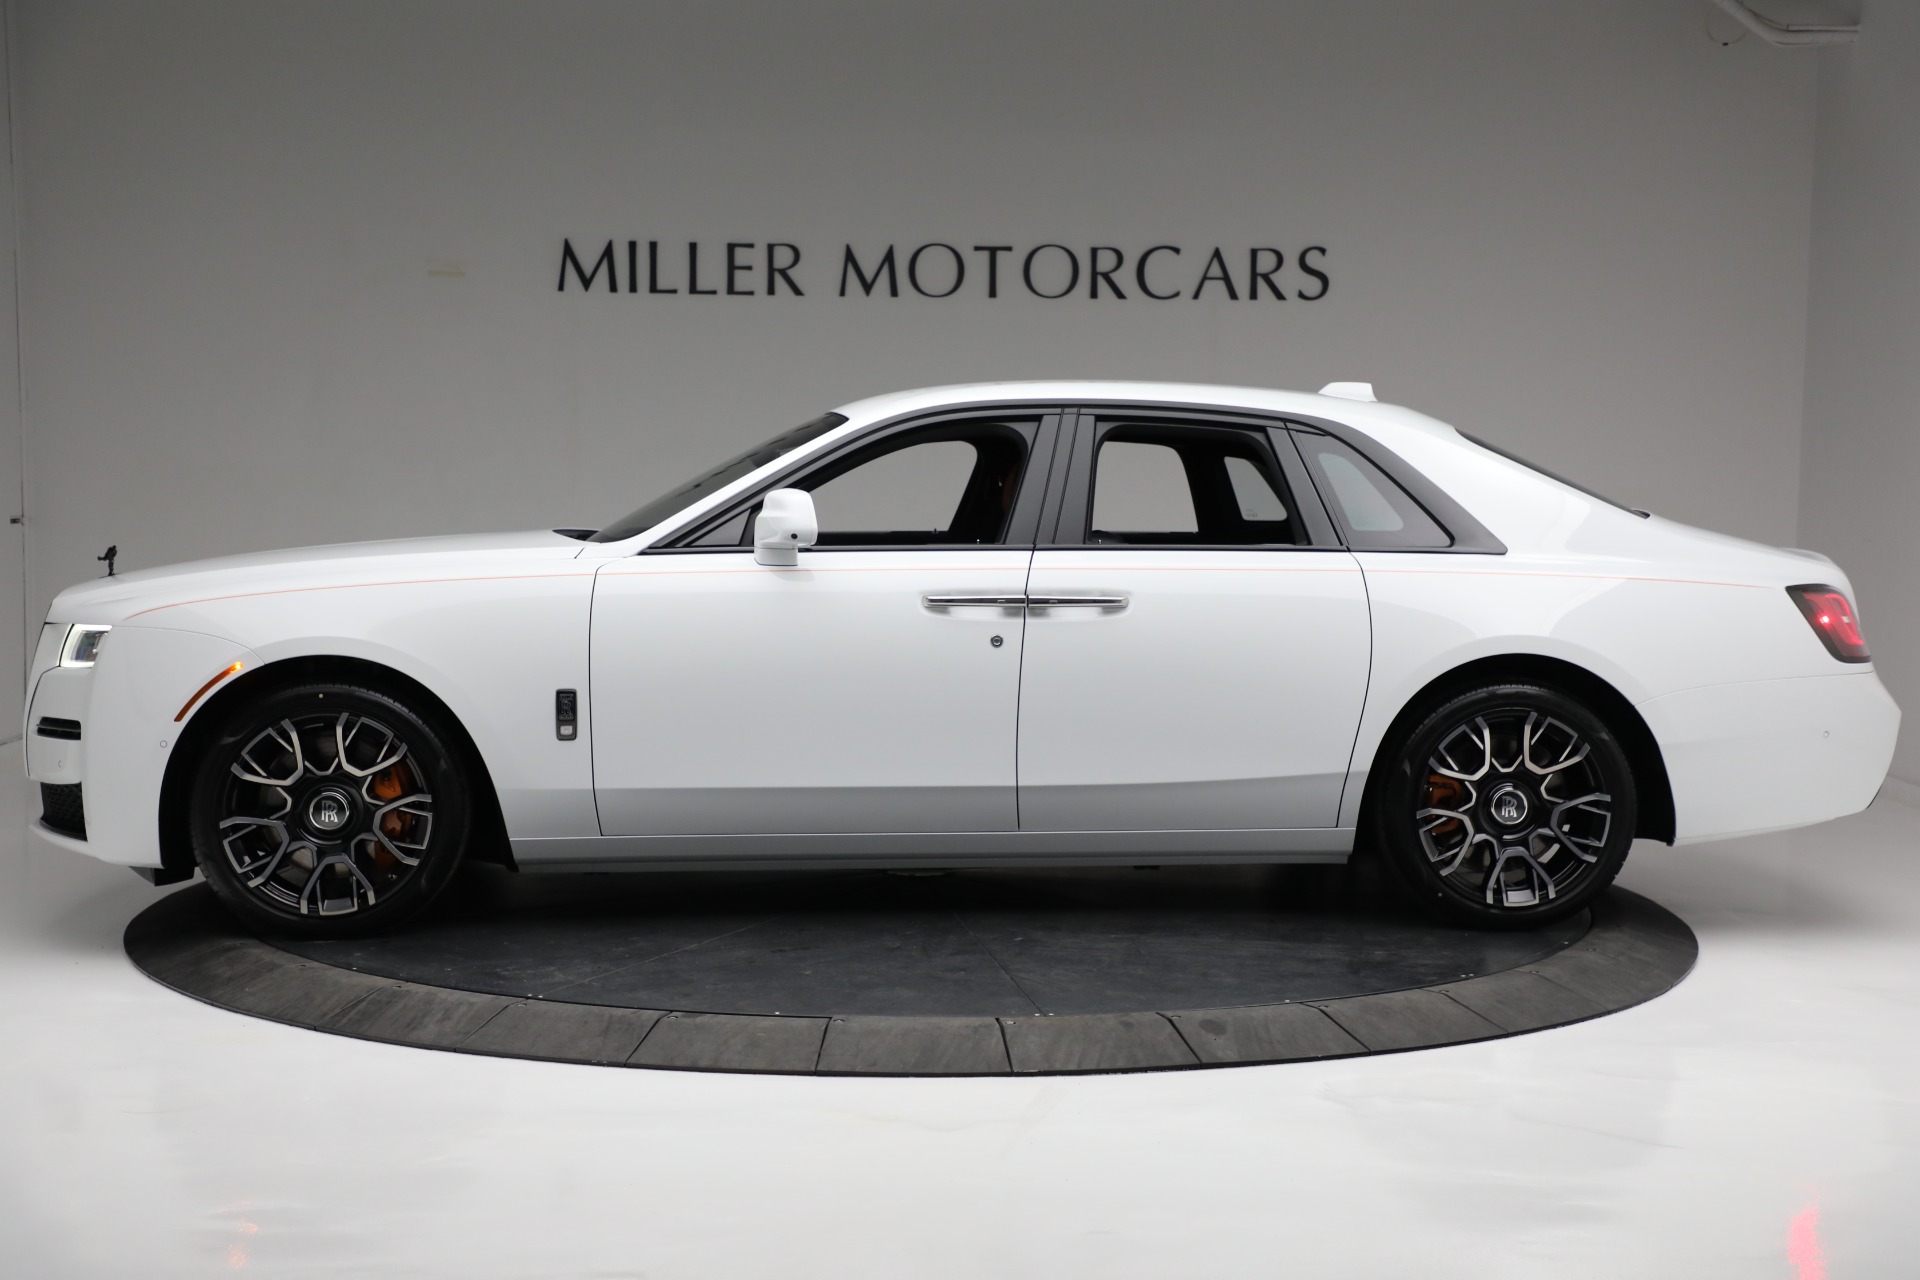 Full vehicle details of 2022 Rolls-Royce Ghost Black Badge Ghost Arctic  White Arctic White Black Badge Technical Fibre Veneer available for sale at  Rolls-Royce Motor Cars Tokyo 4-1 Kioi-Cho,Chiyoda-Ku,Tokyo 102-0094 for €0